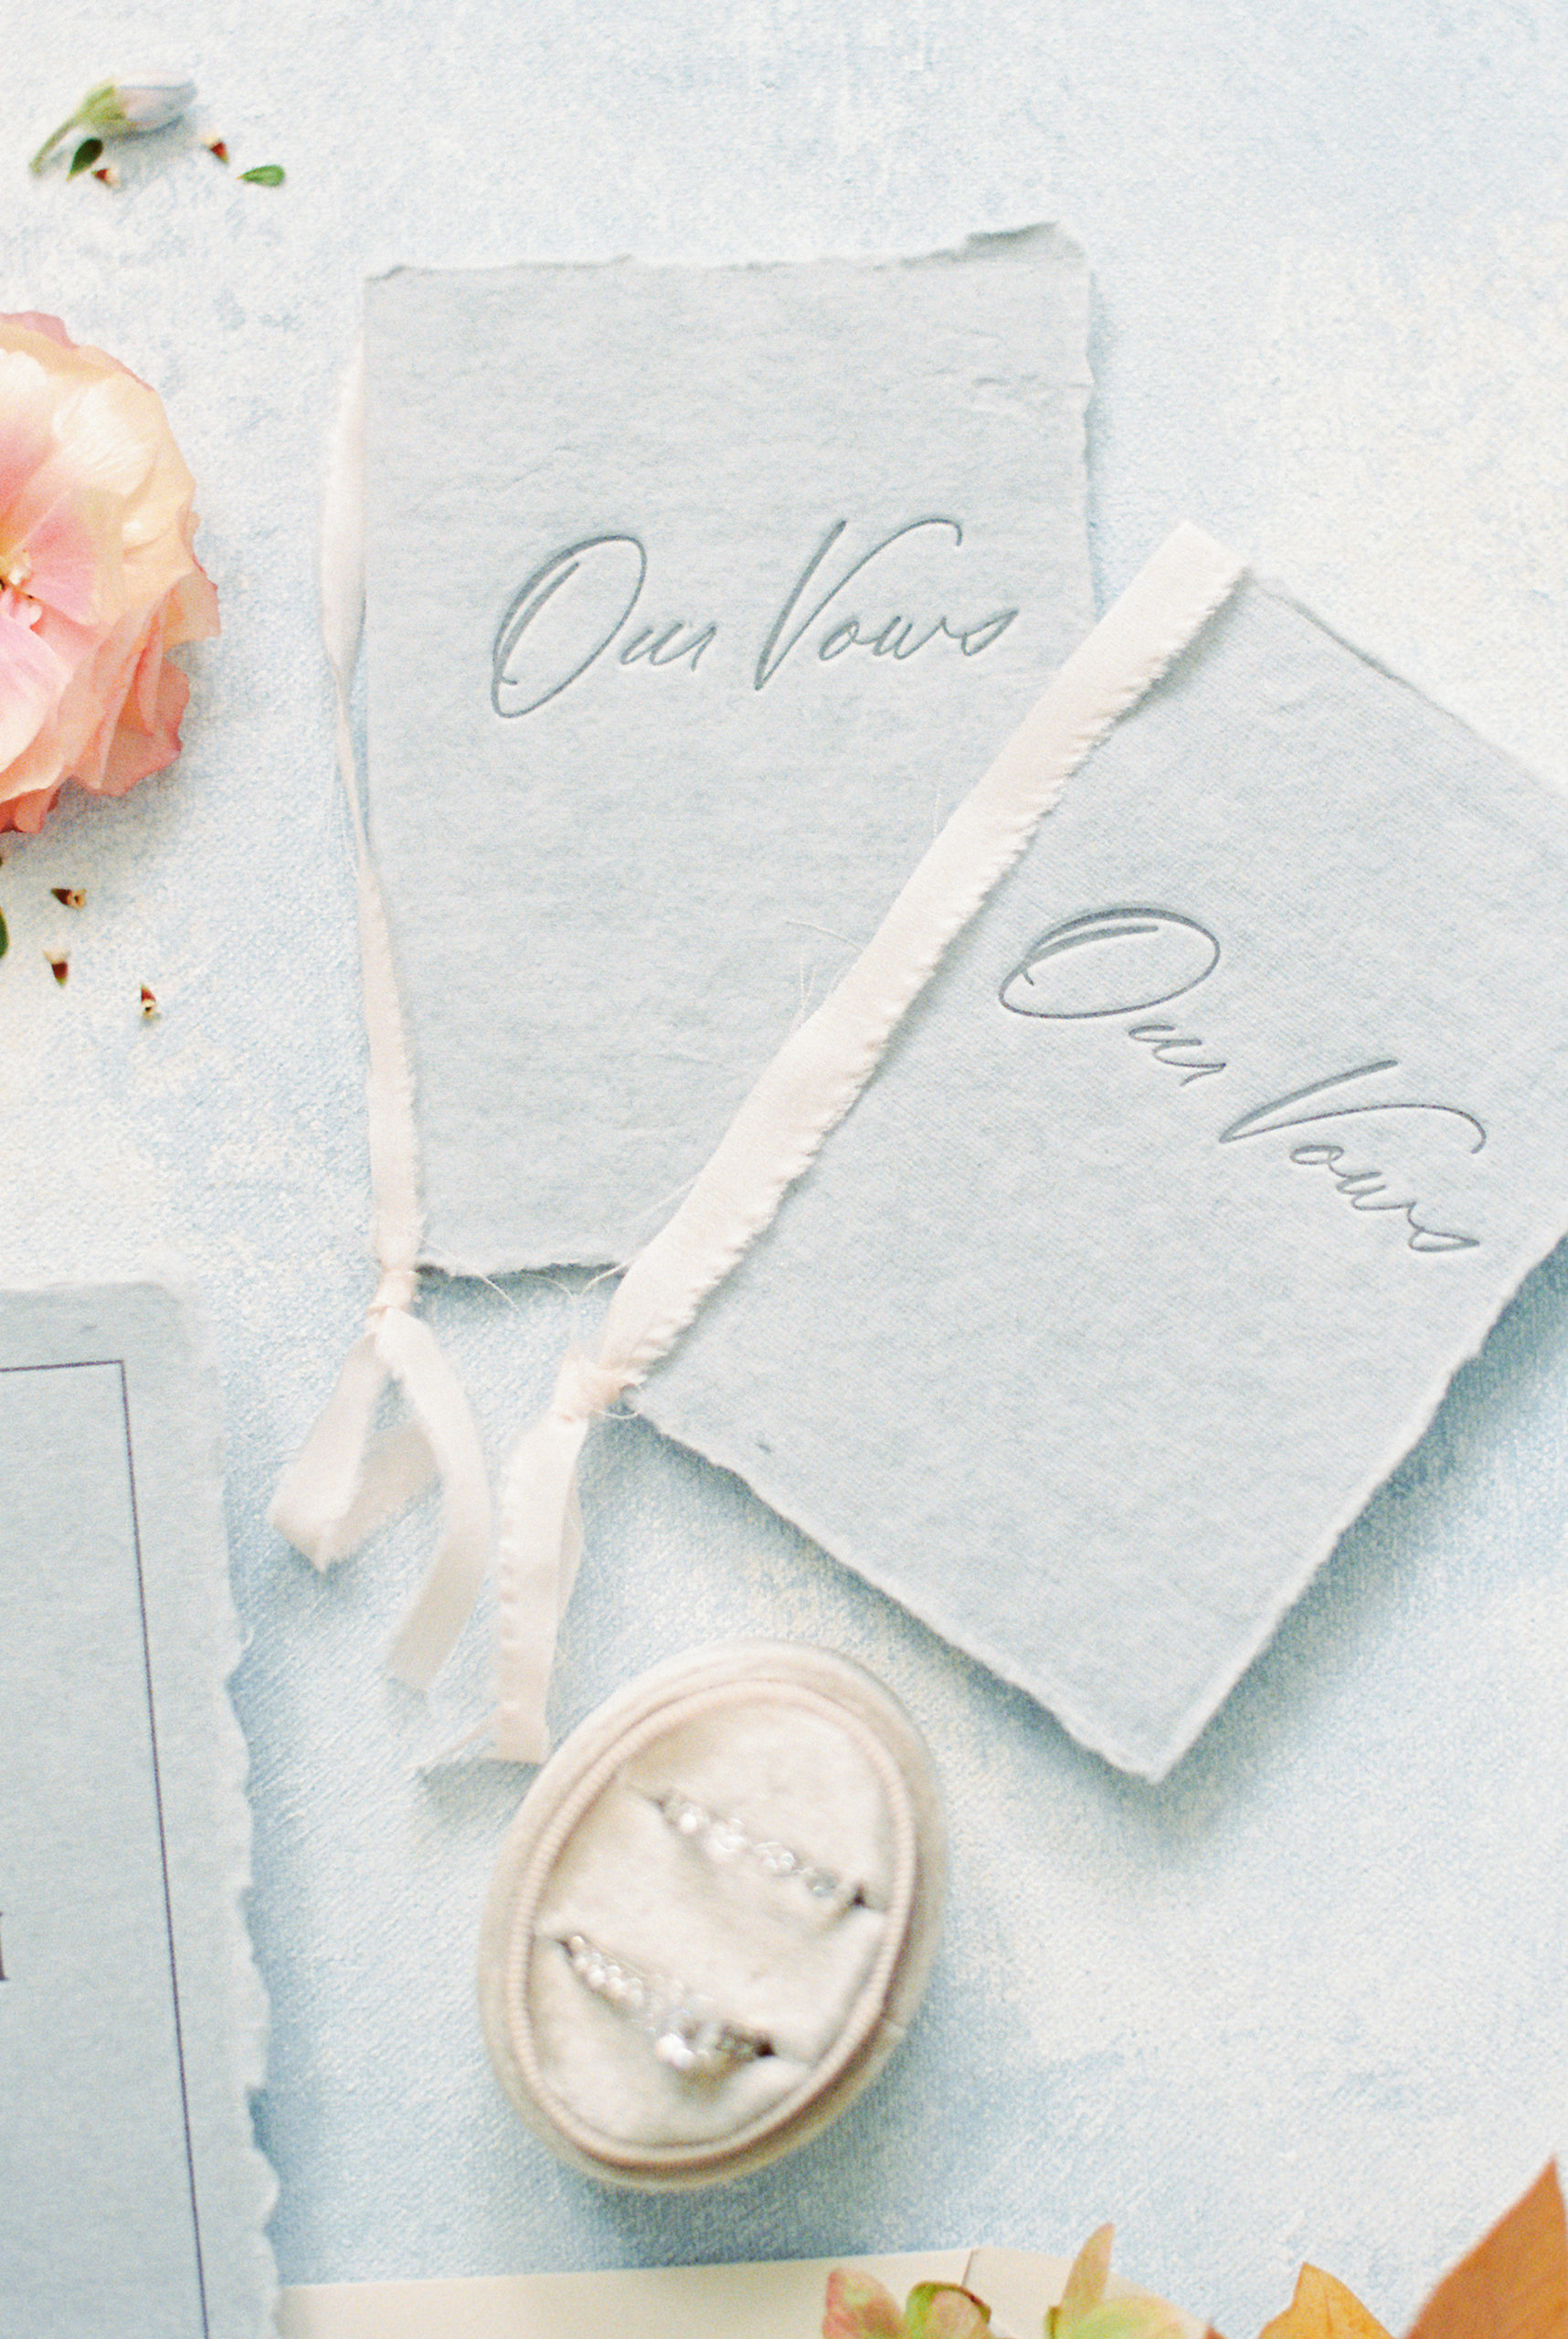 vow books for writing personal wedding vows for ceremony